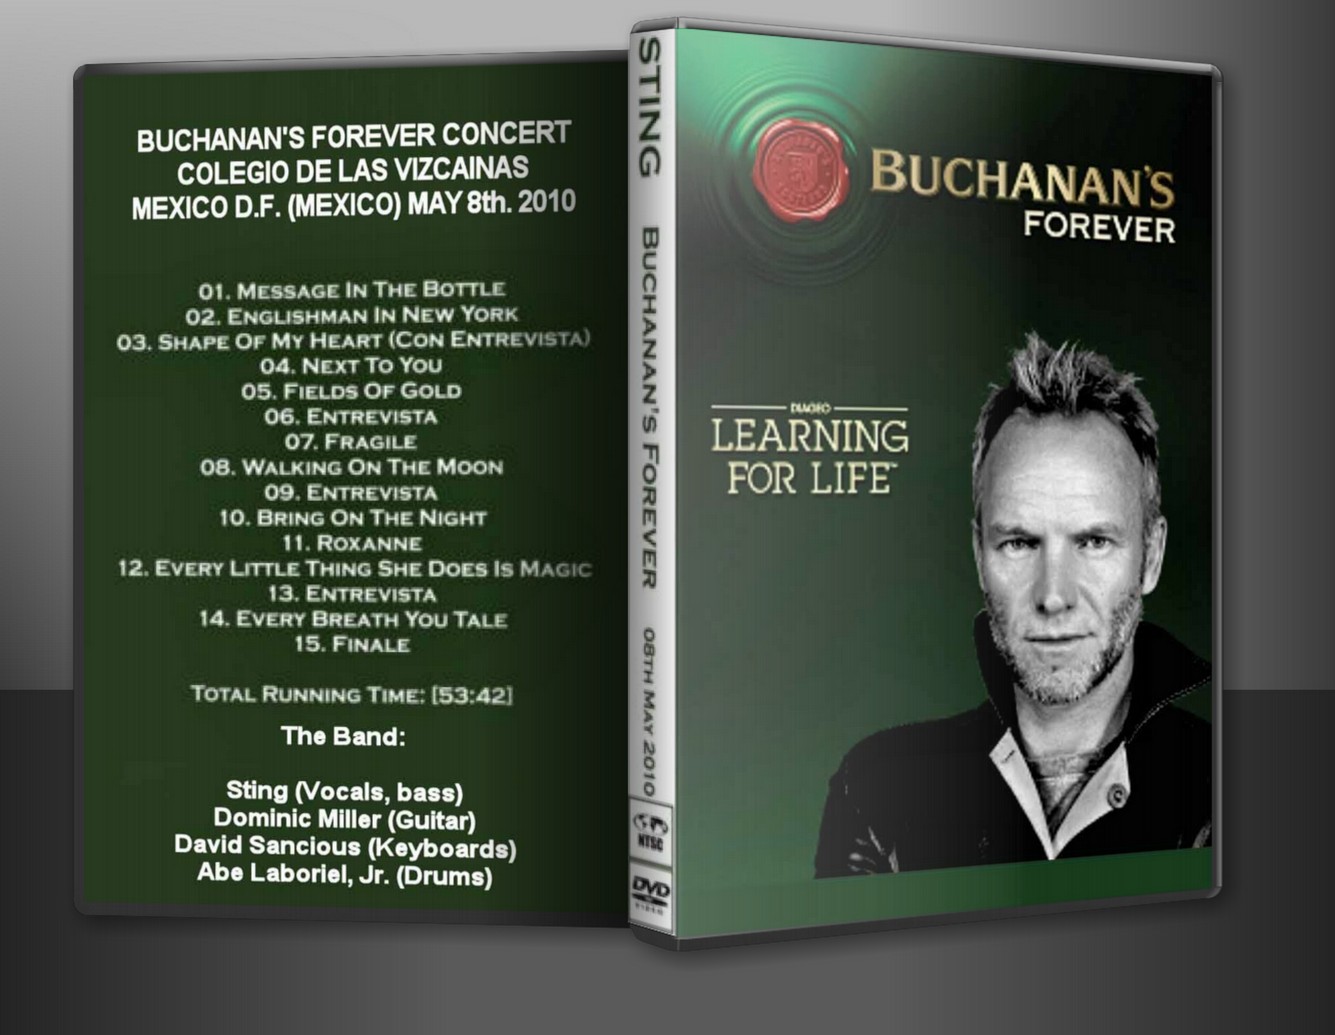 http://1.bp.blogspot.com/-hWElcHLrTAs/Tq59HcJxrLI/AAAAAAAAEUk/ylIpSQVaNsI/s1600/DVD+Cover+For+Show+-+Sting+-+Live+In+Mexico+City%252C+Mexico+2010.jpg